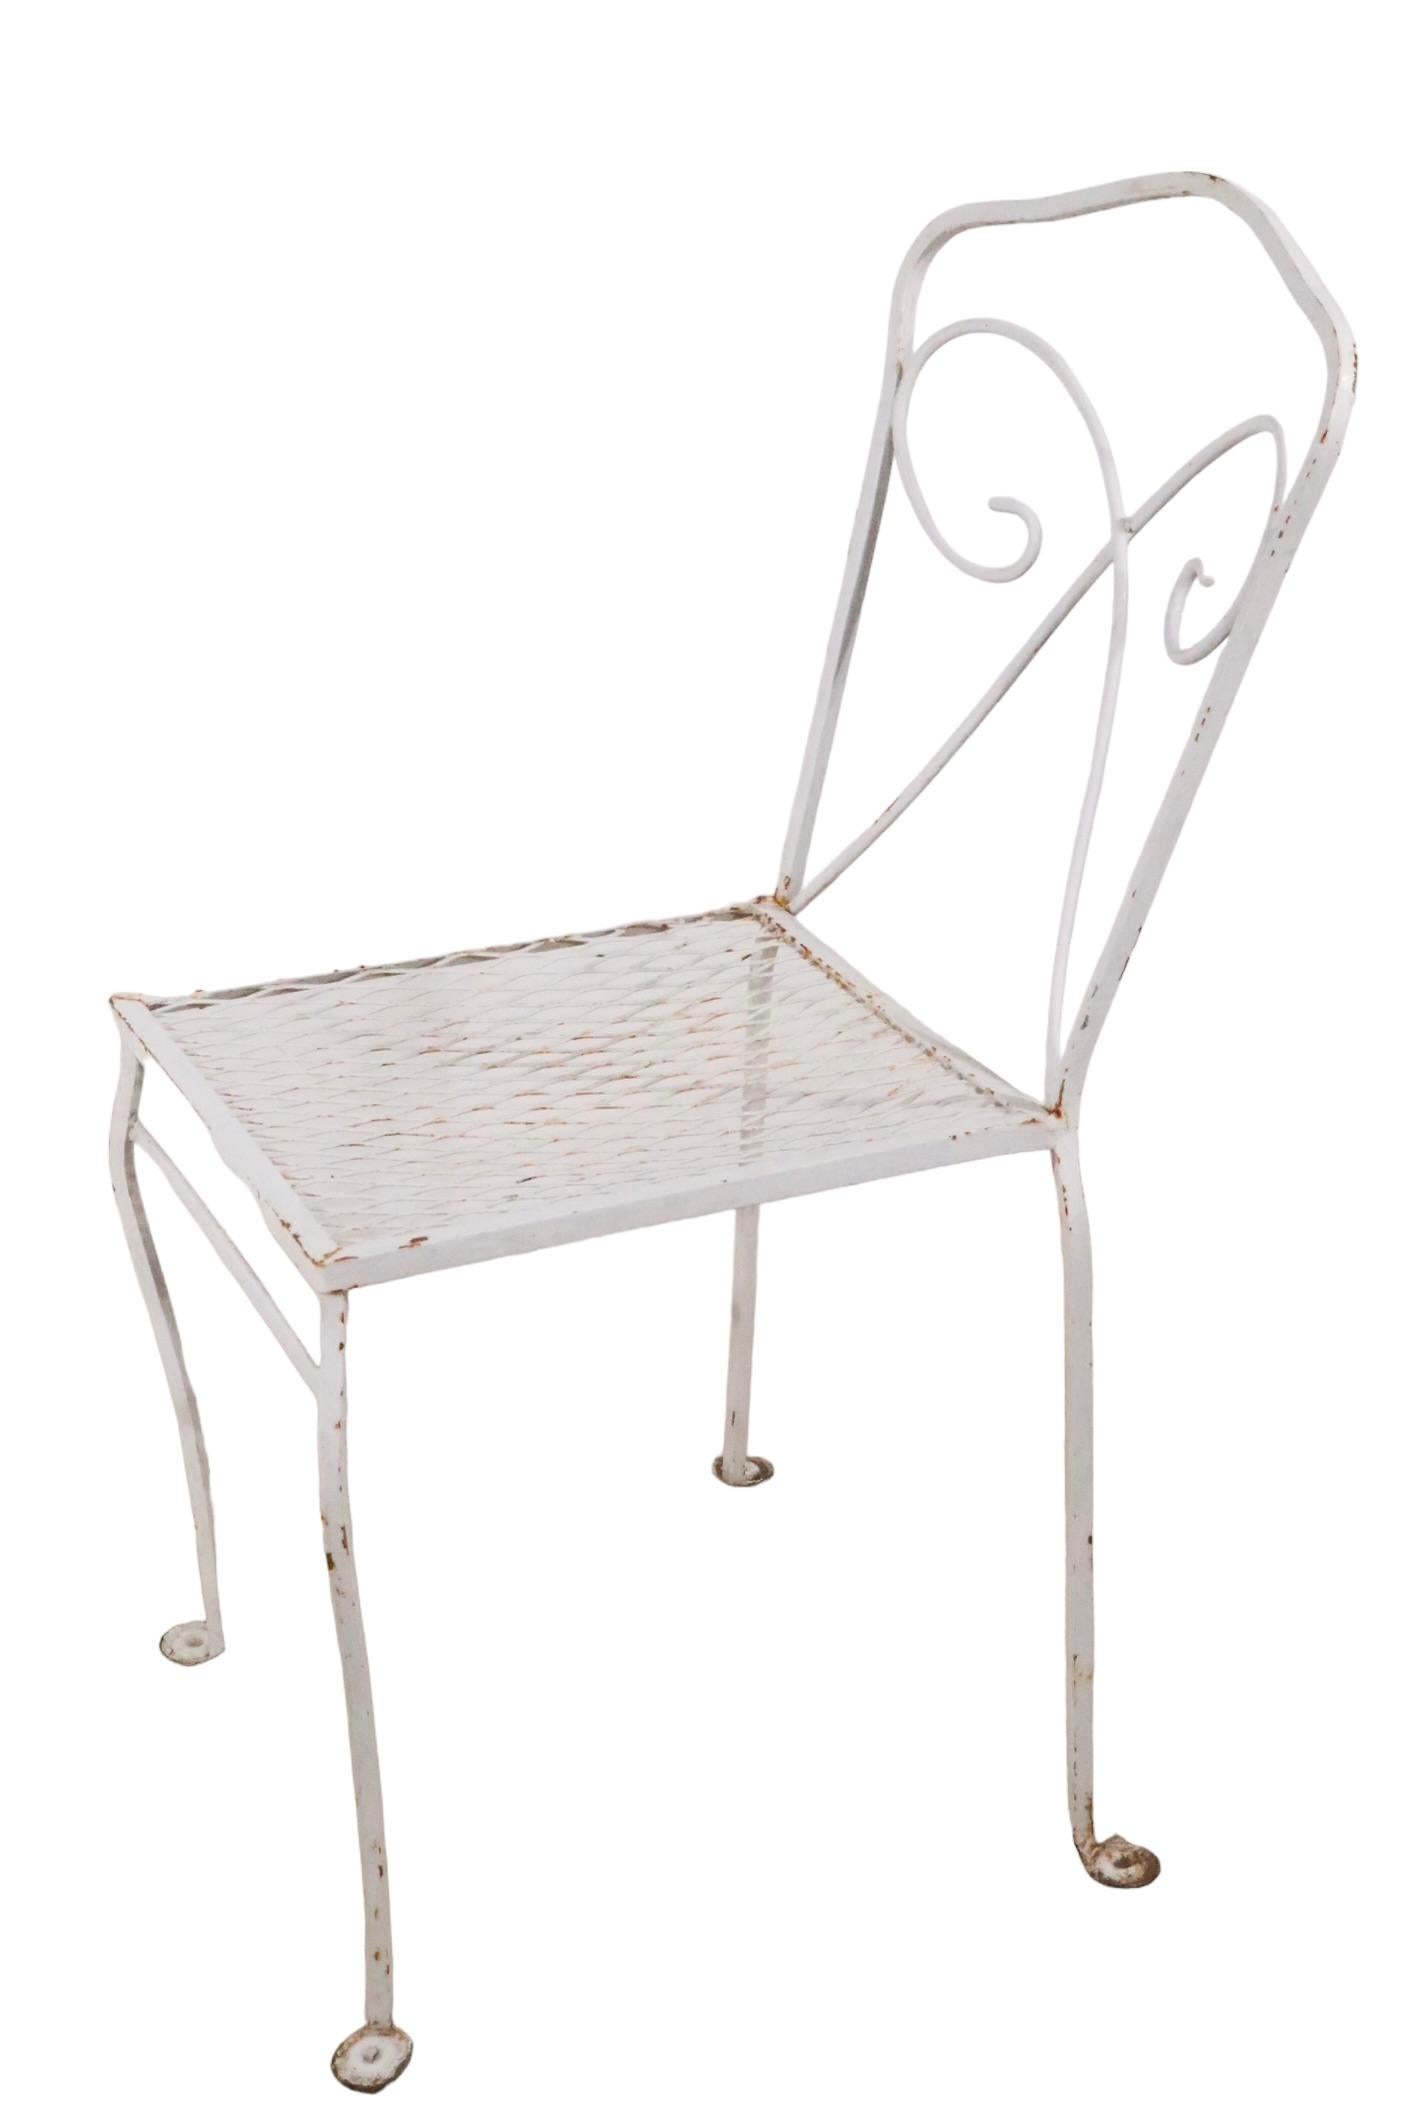 Set of Four Wrought Iron Garden Patio Chairs Possibly by Woodard c 1950/1970s  In Fair Condition For Sale In New York, NY